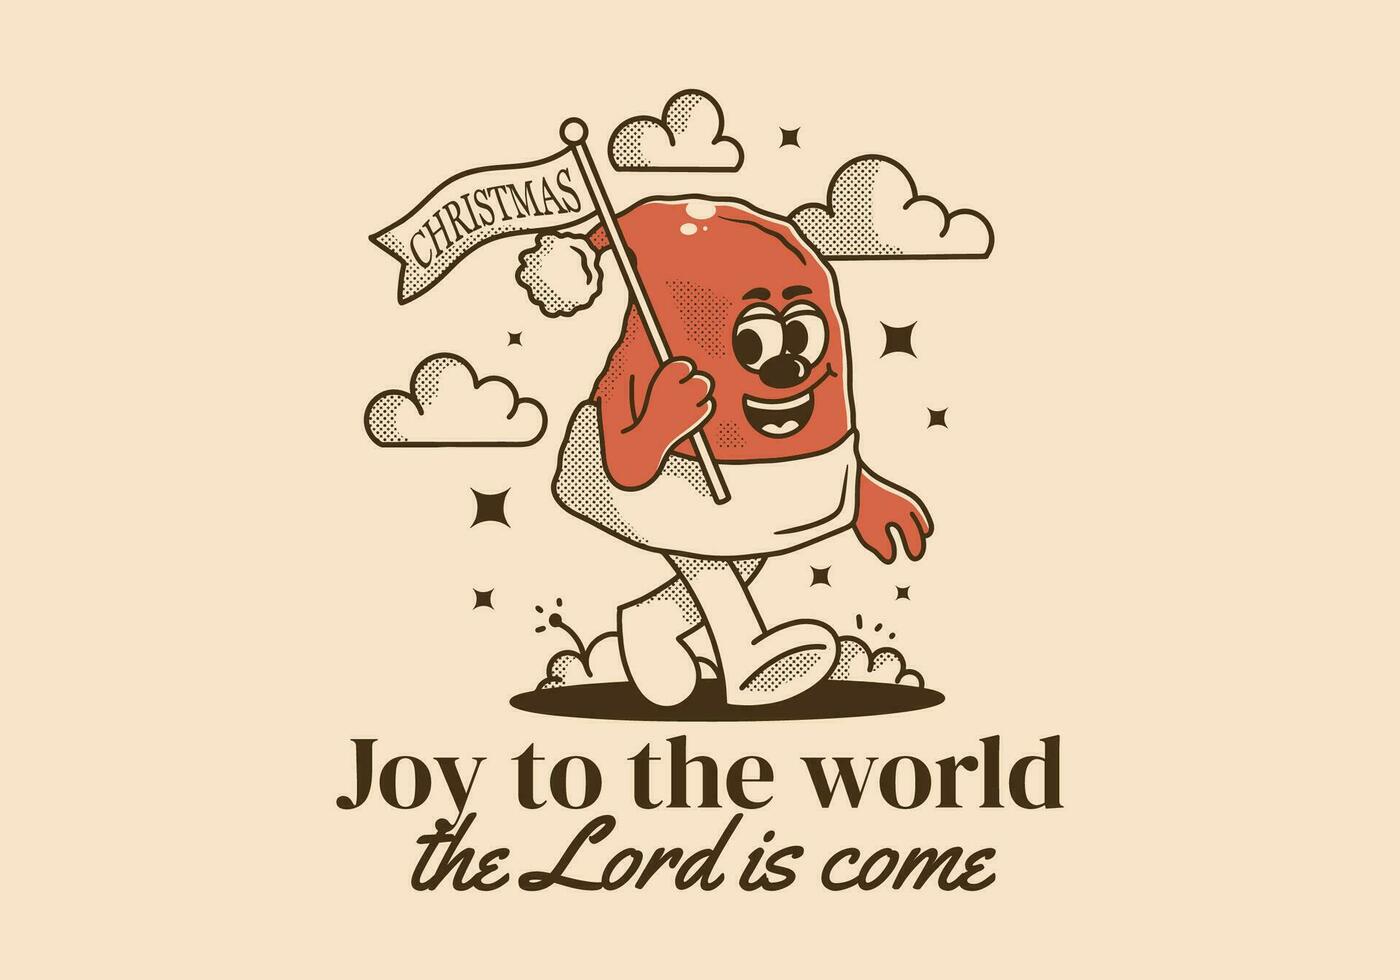 Joy to the world the Lord is come. Character illustration of walking Christmas hat vector